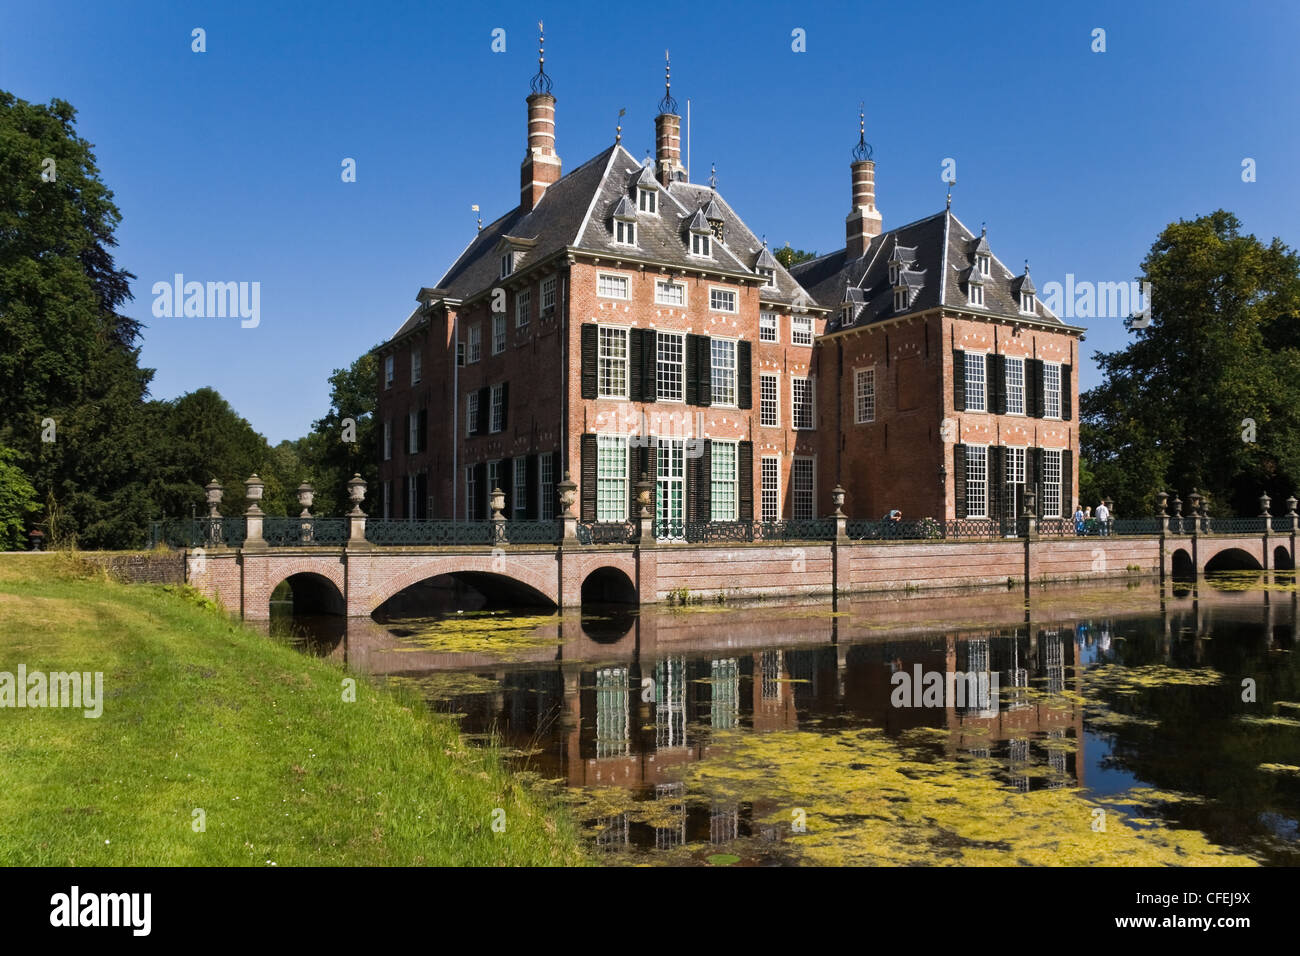 Duivenvoorde Castle, Voorschoten, the Netherlands. Build in 1631 and with English landscape park. Stock Photo